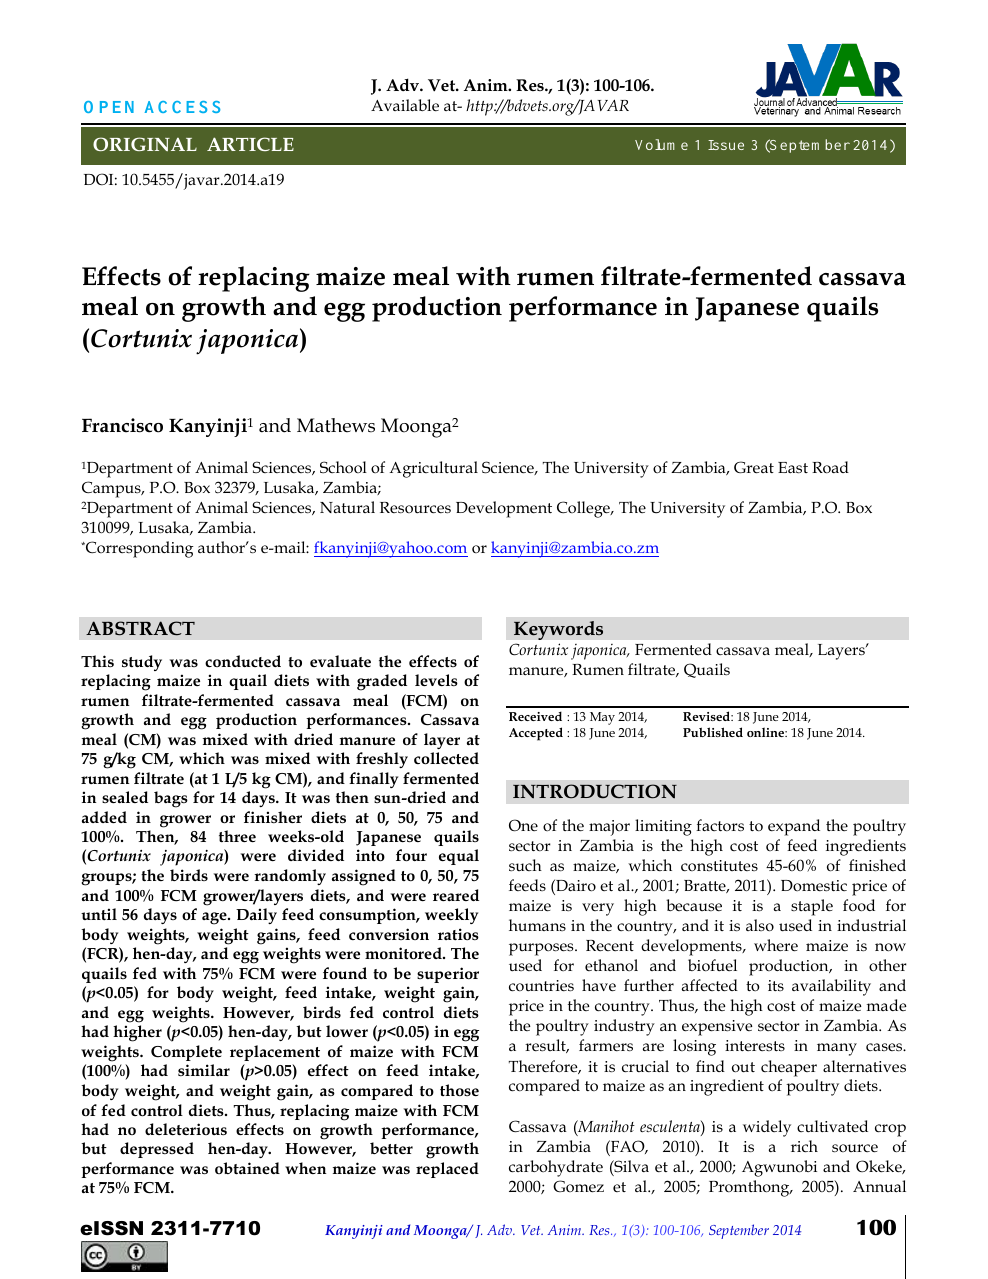 Effects of replacing maize meal with rumen filtrate-fermented cassava meal  on growth and egg production performance in Japanese quails (Cortunix  japonica) – topic of research paper in Animal and dairy science. Download